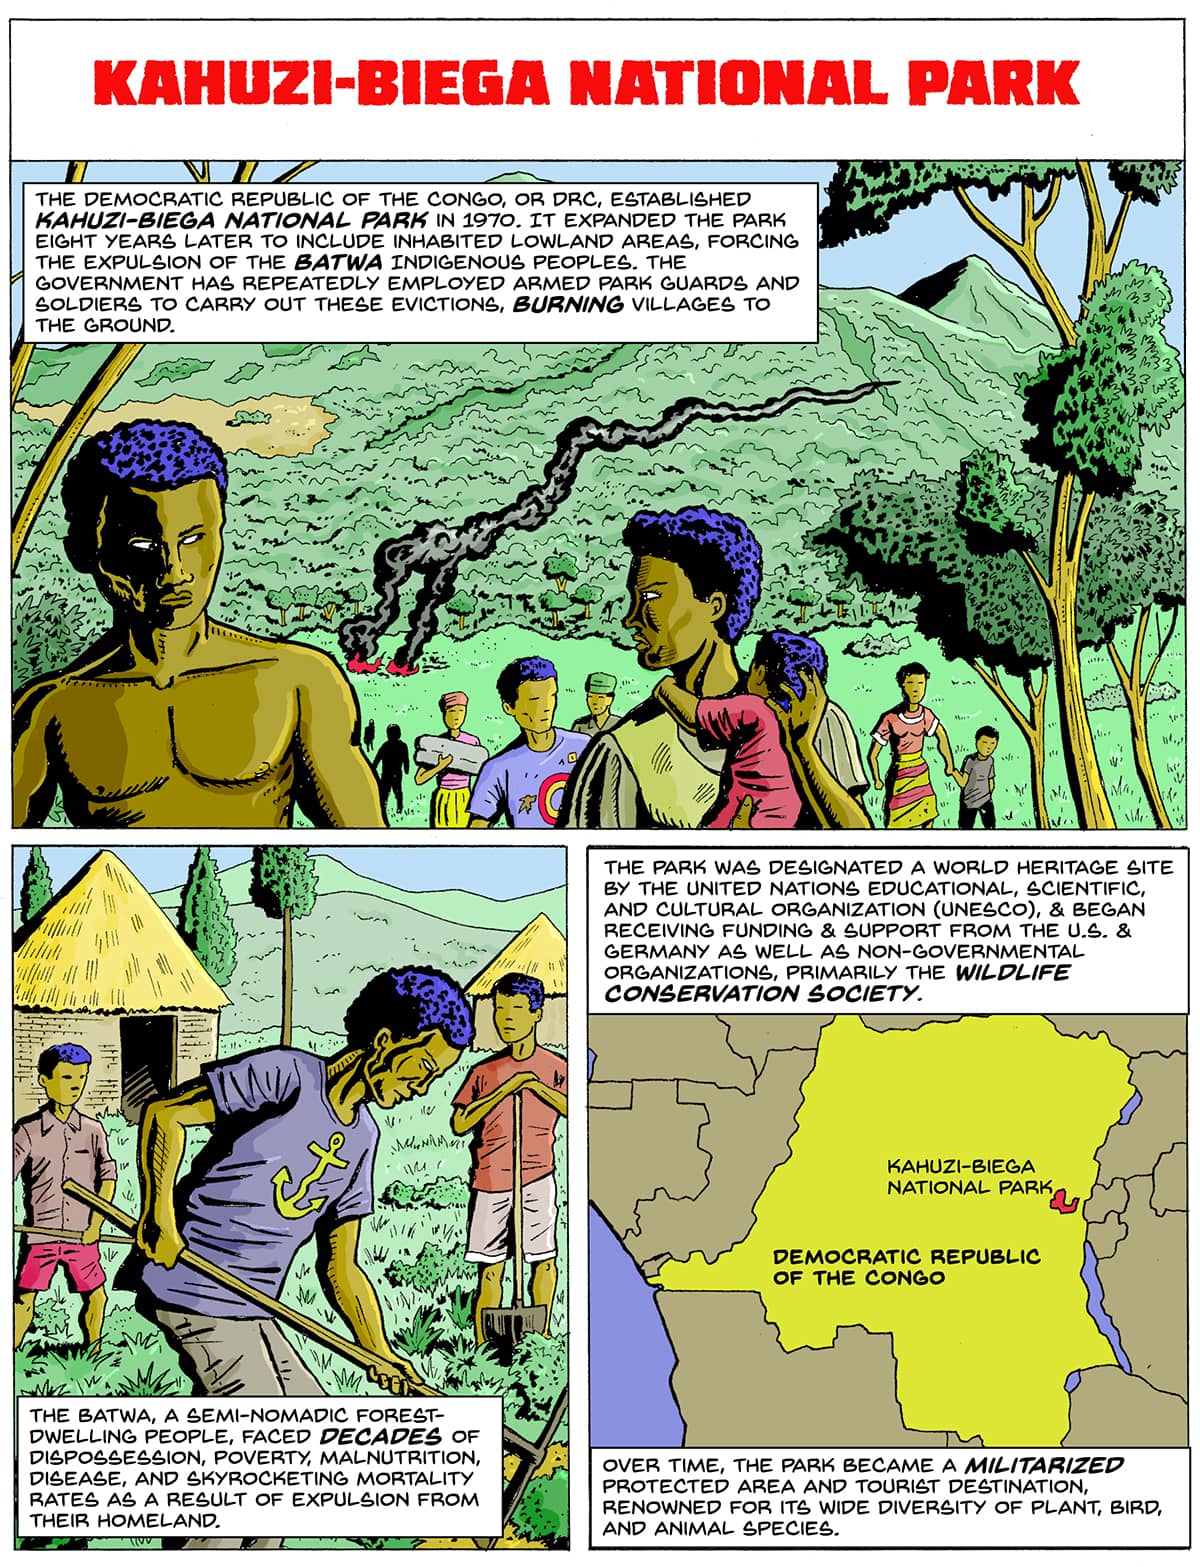 A three-panel comic with the title "Kahuzi-Biega National Park" Top: A group of people including children move through a forest away from a burning spot. Bottom left: People in t-shirts rake the land near huts. Bottom right: A map showing the Democratic Republic of Congo. Text: The Democratic Republic of the Congo, or DRC, established Kahuzi-Biega National Park in 1970. It expanded the park eight years later to include inhabited lowland areas, forcing the expulsion of the Batwa Indigenous peoples. The government has repeatedly employed armed park guards and soldiers to carry out these evictions, burning villages to the ground. The Batwa, a semi-nomadic forest-dwelling people, faced decades of dispossession, poverty, malnutrition, disease, and skyrocketing mortality rates as a result of expulsion from their homeland. The park was designated a World Heritage Site by the United Nations Educational, Scientific, and Cultural Organization, or UNESCO, and began receiving funding and support from the U.S. and Germany as well as non-governmental organizations, primarily the Wildlife Conservation Society. Over time, the park became a militarized protected area and tourist destination, renowned for its wide diversity of plant, bird, and animal species.